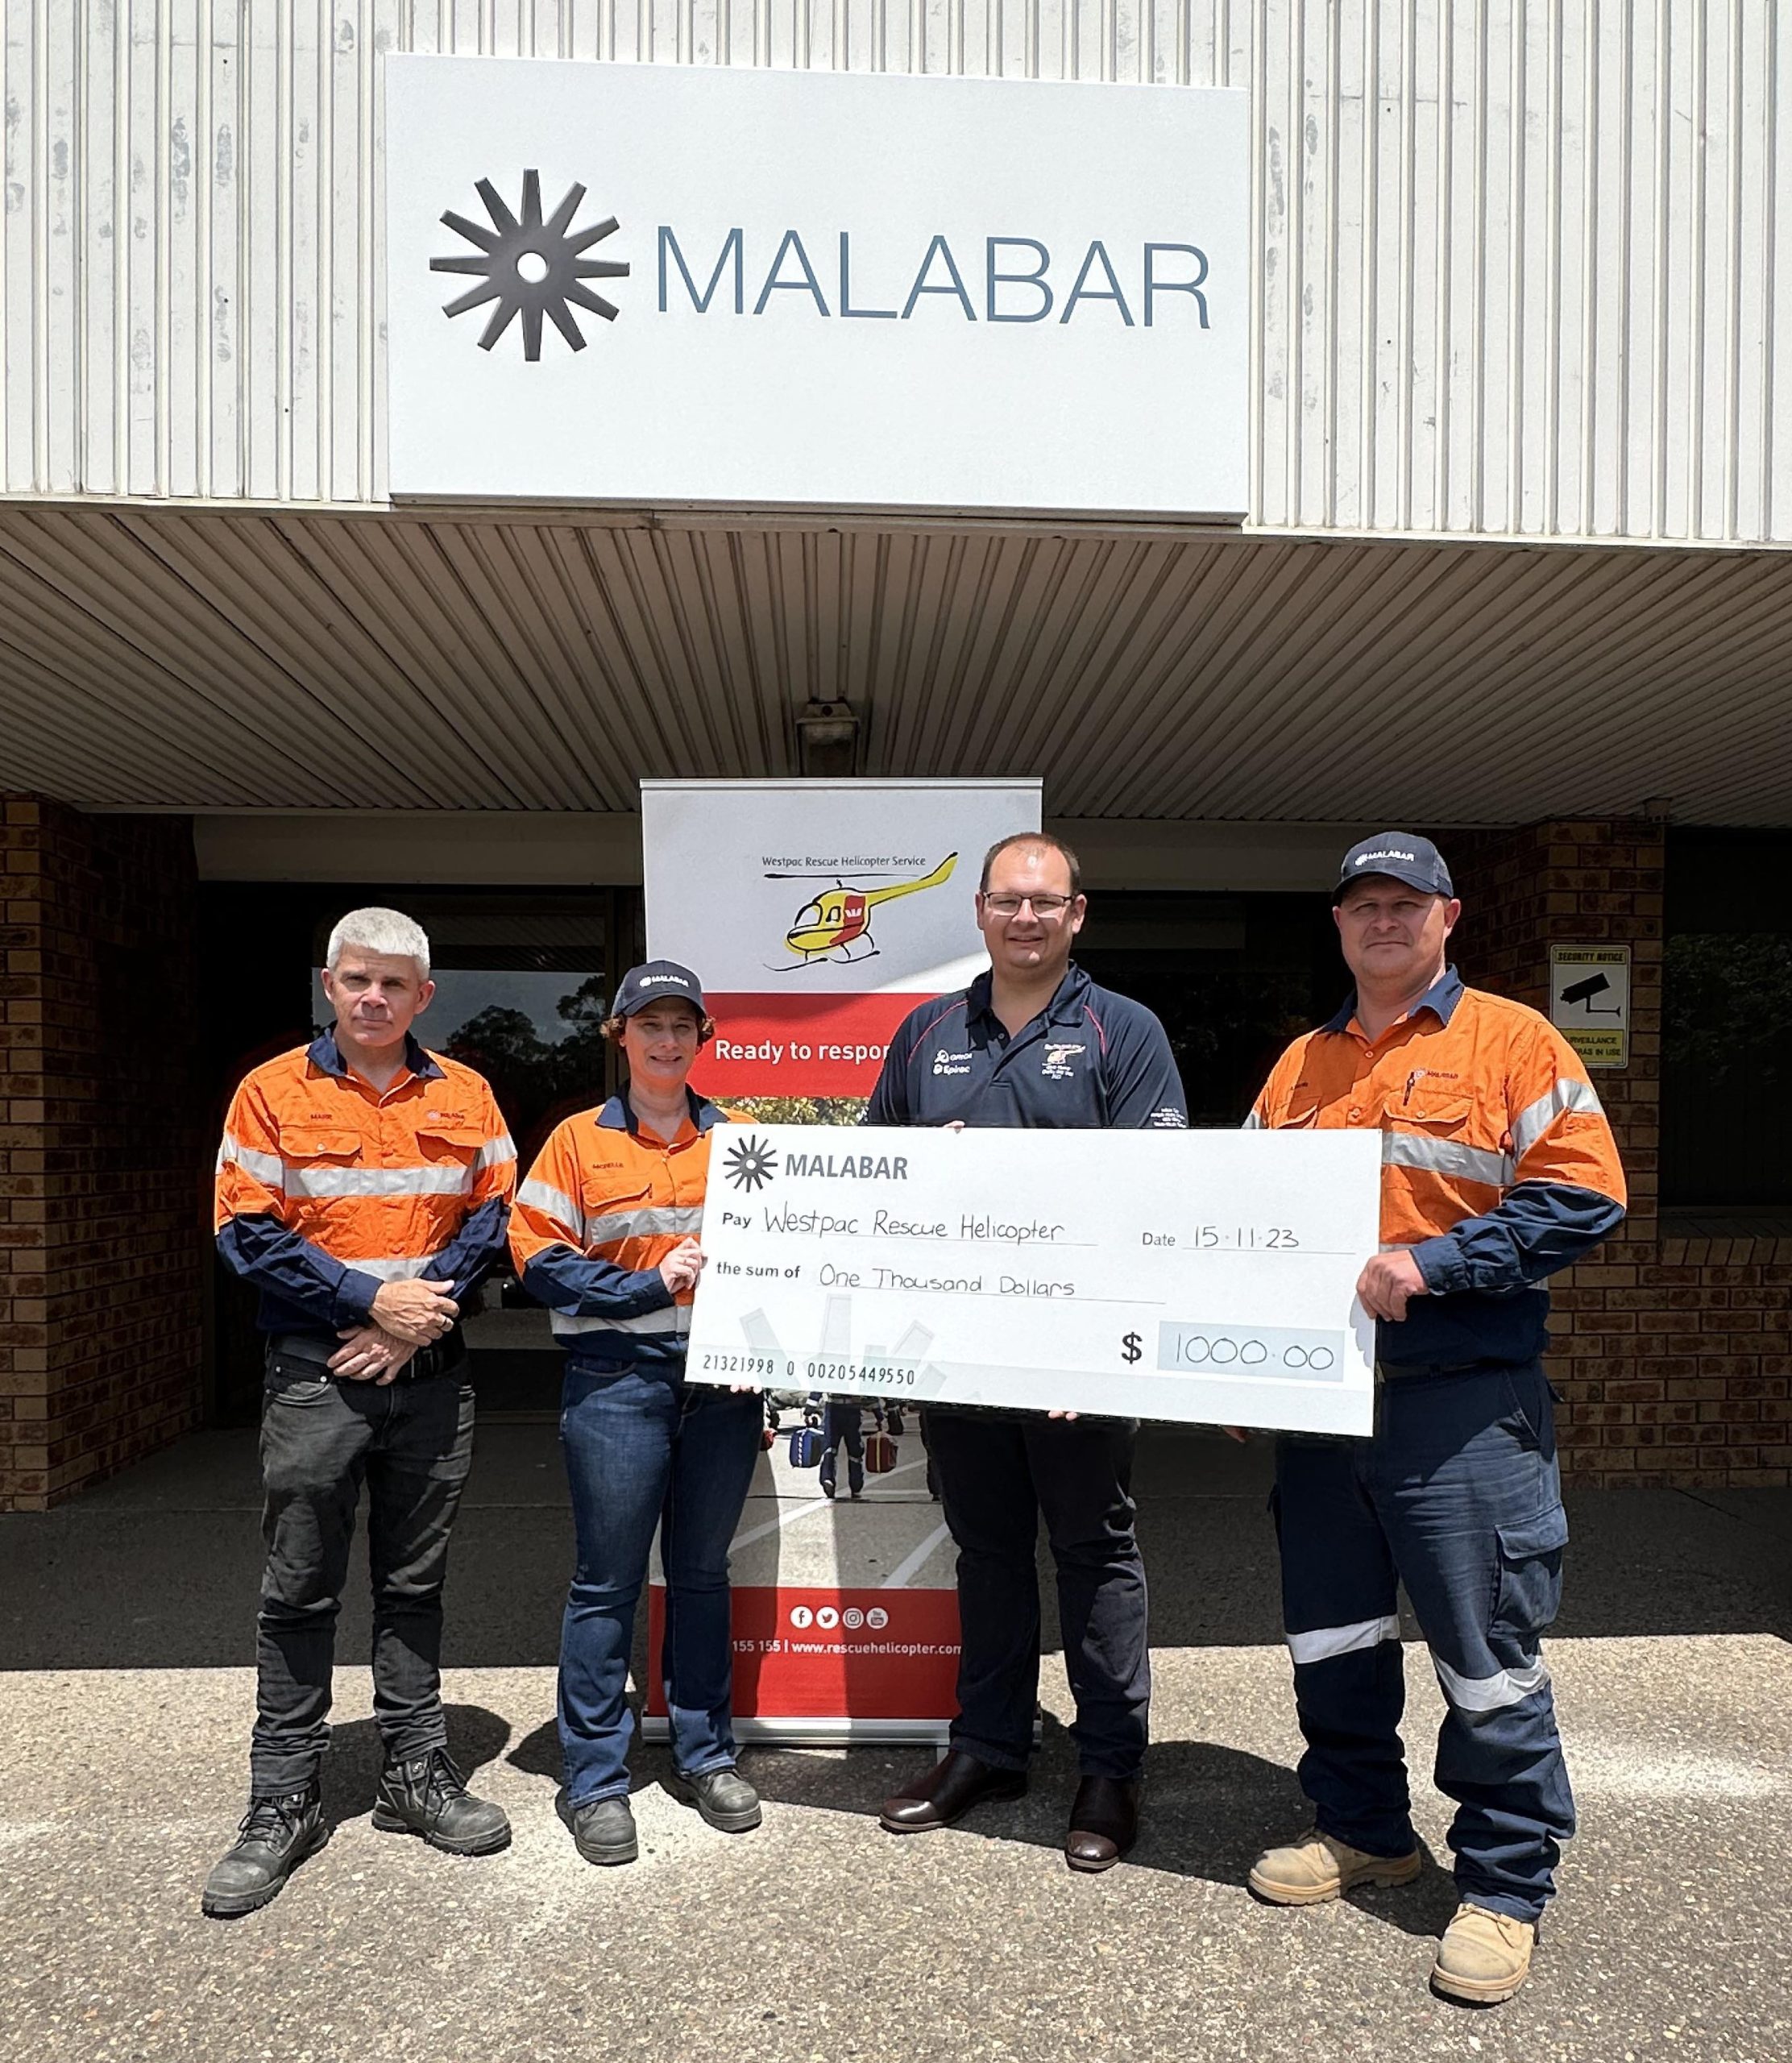 Malabar Resources Supports Westpac Rescue Helicopter in Lifesaving Mission